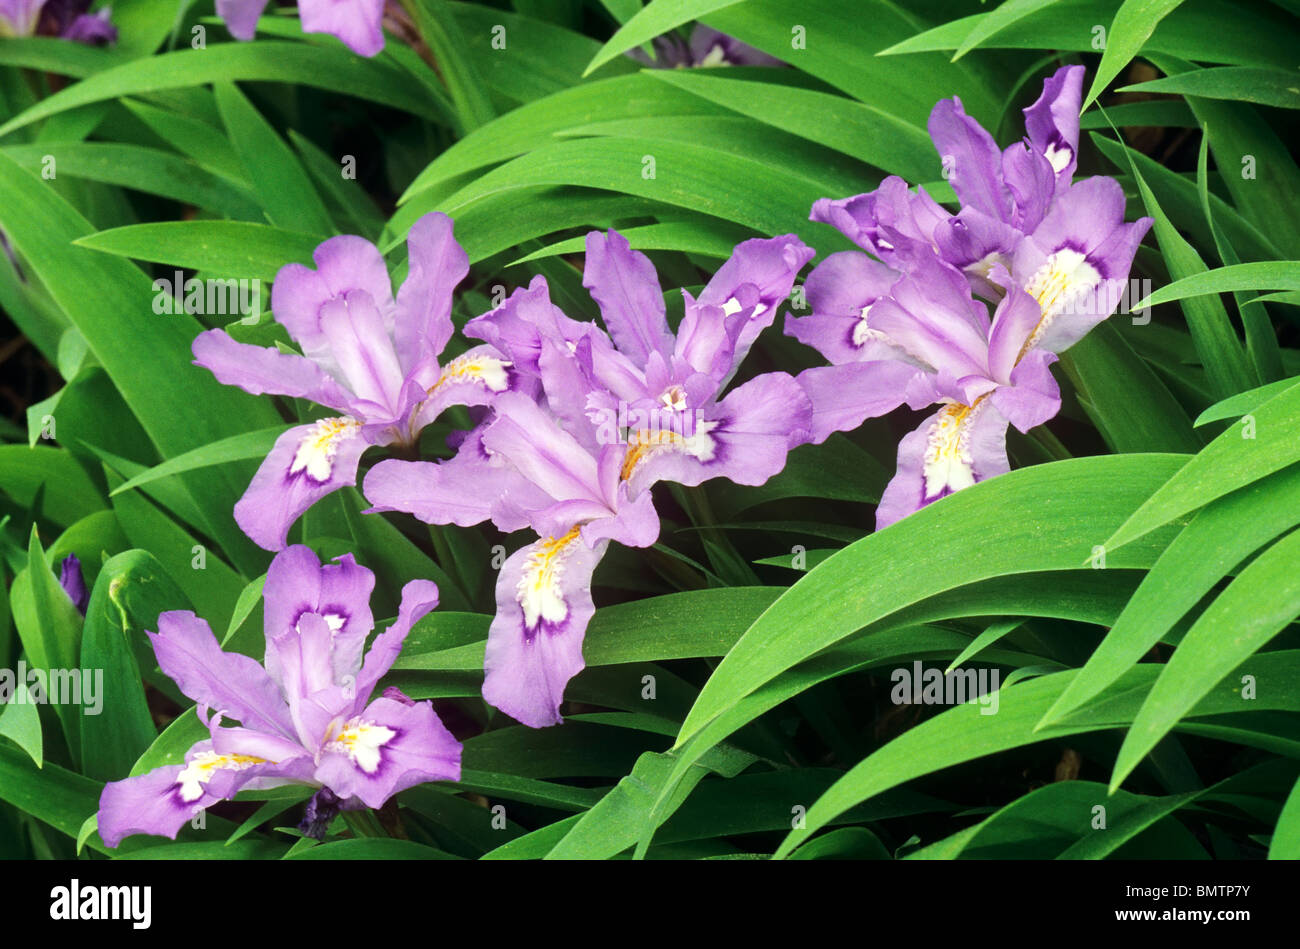 Crested Dwarf Iris (Iris crestata) in the Great Smoky Mountains National Park, United States Stock Photo